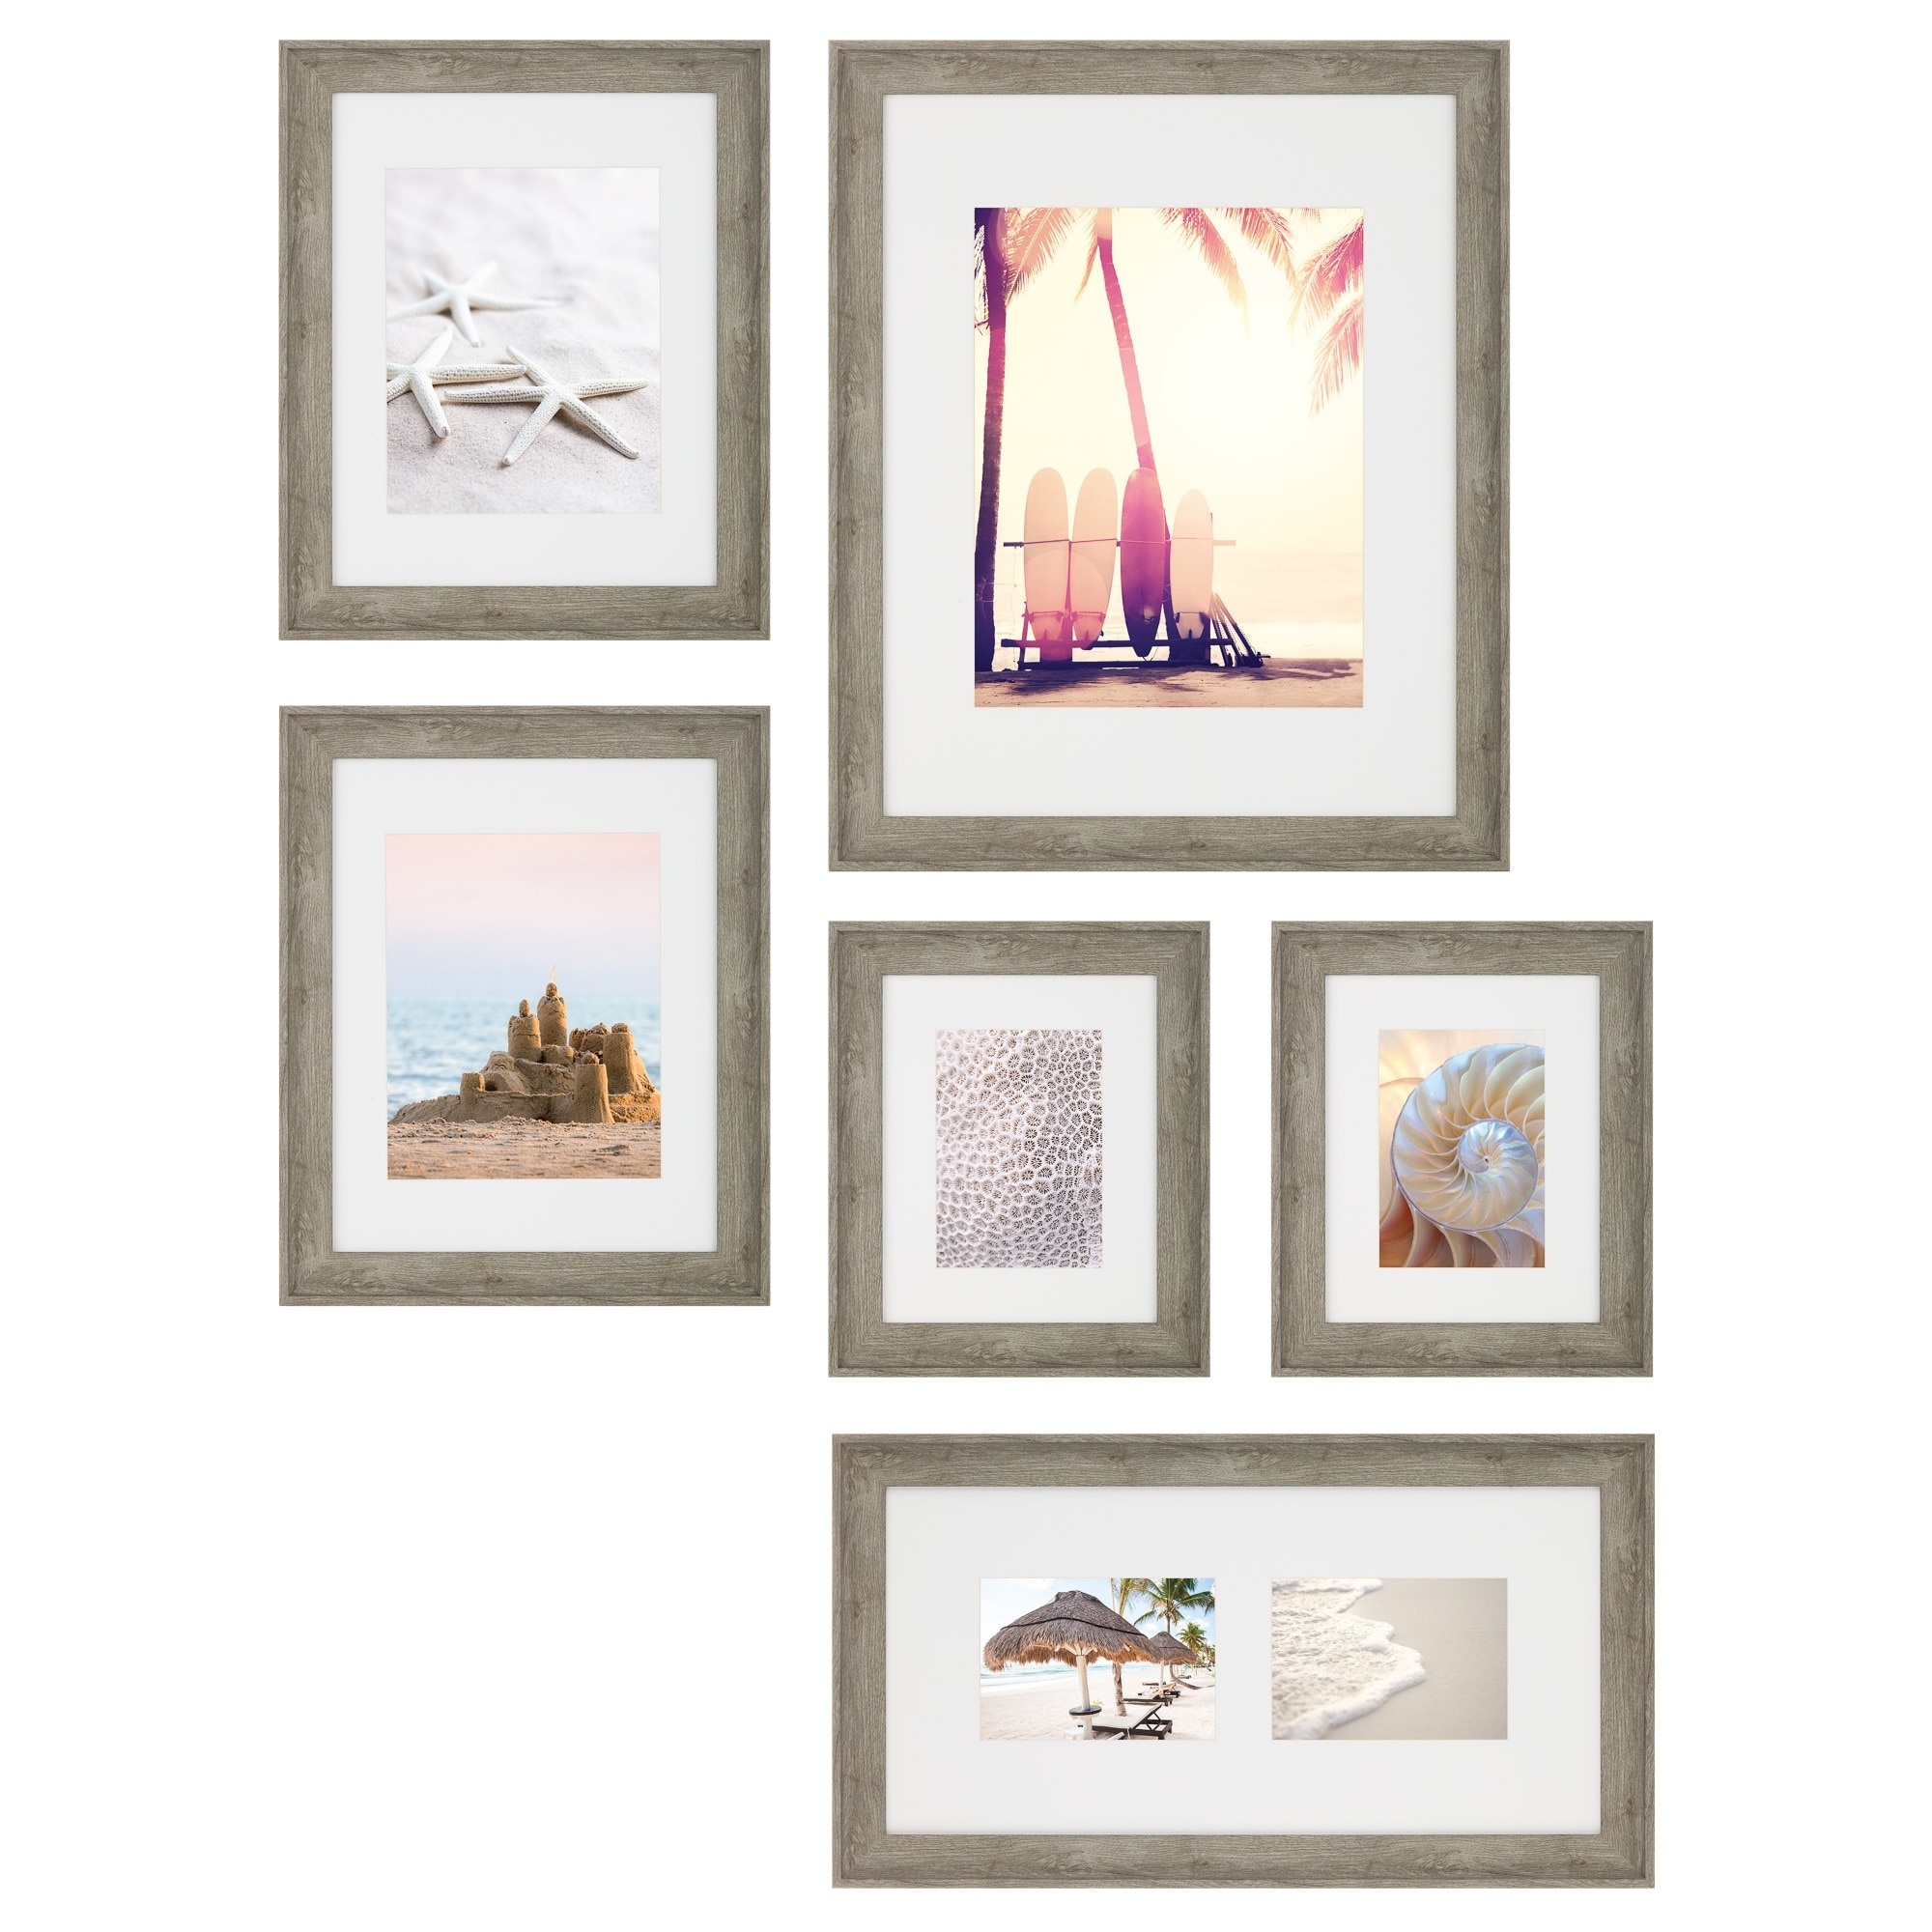 https://ak1.ostkcdn.com/images/products/is/images/direct/5cb61a23f4eaffd3505ccca3386a03465fc1128e/6-Piece-Gallery-Wall-Picture-Frame-Set-in-Multiple-Sizes-with-Decorative-Art-Prints-%26-Hanging-Template.jpg